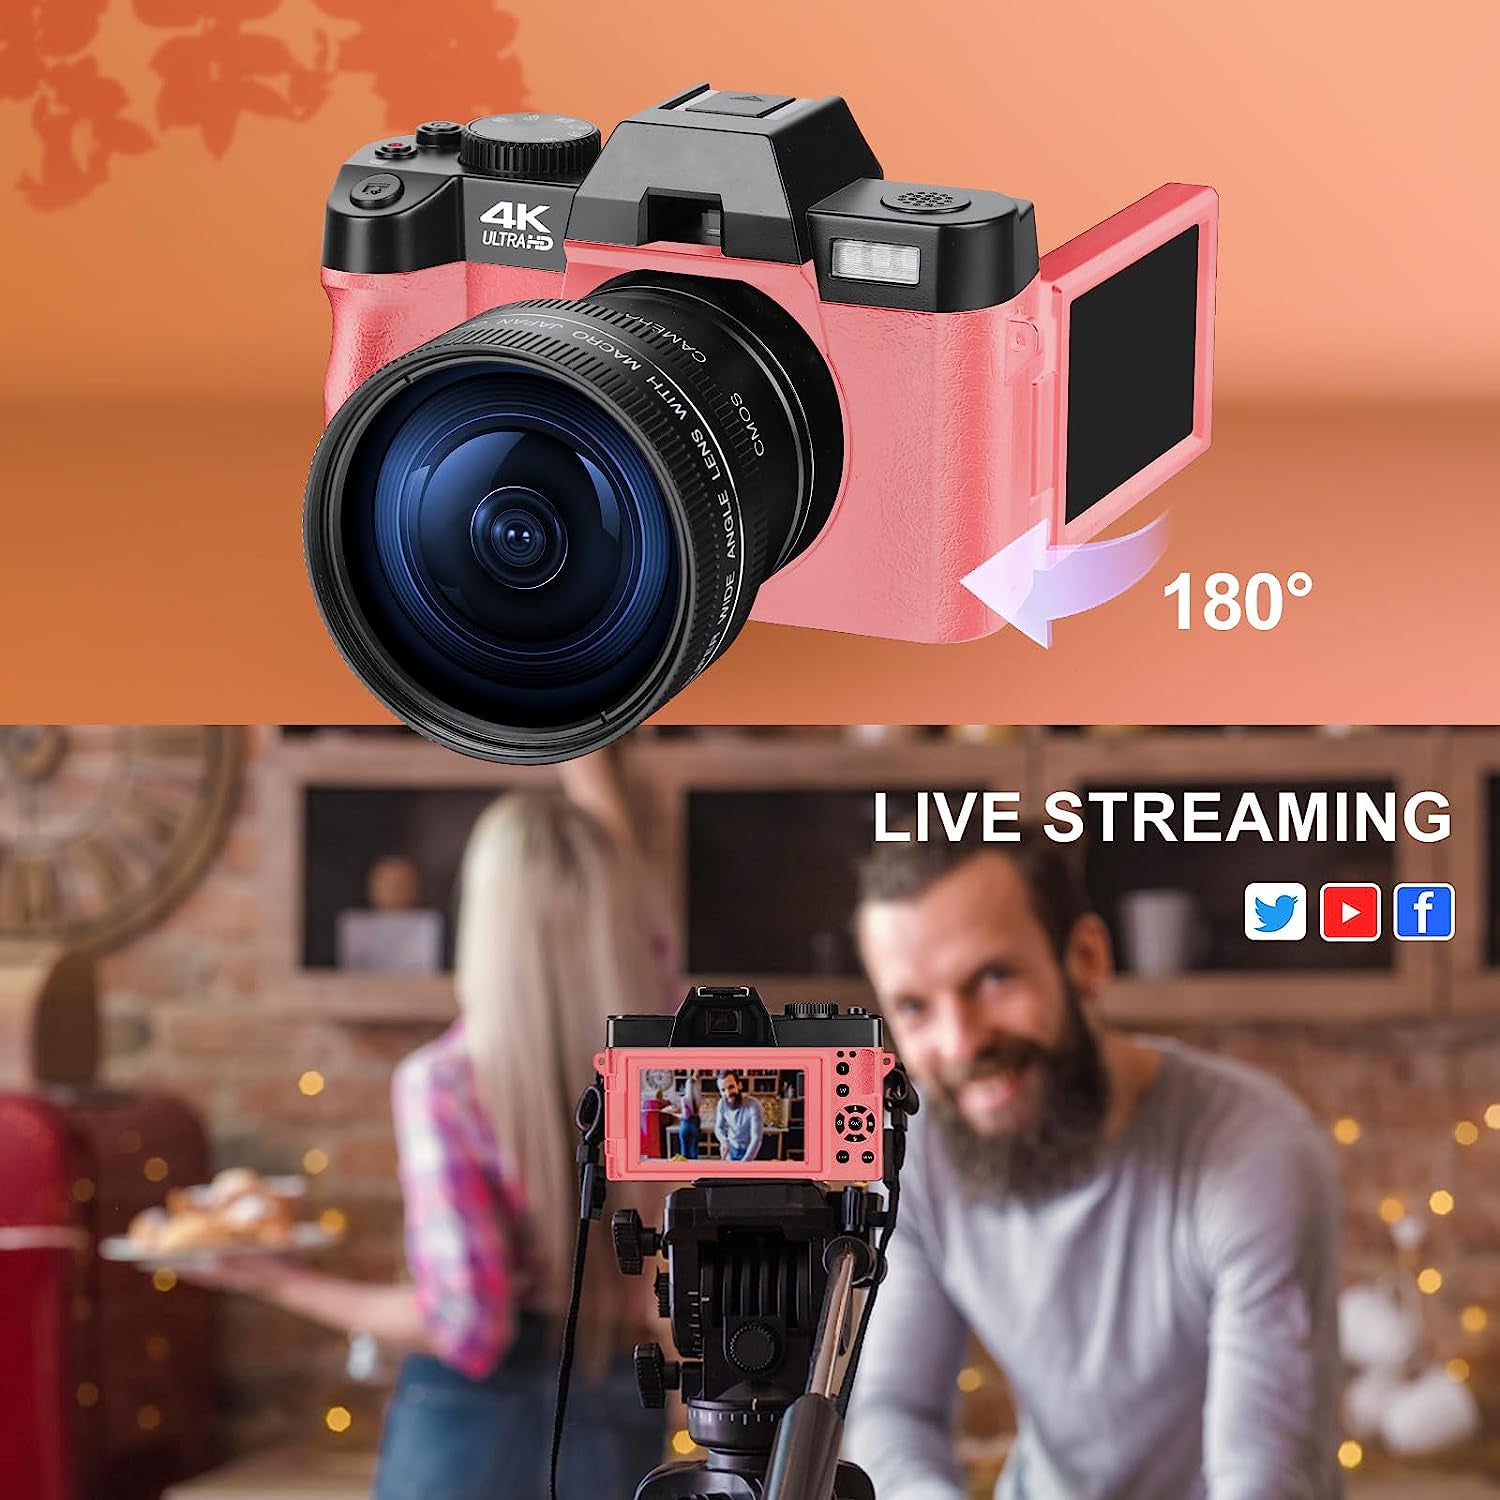 NBD Digital Camera 48MP 4K Video Camera 3.0 Inch Flip Screen Camcorder   Vlogging Camera with Wide Angle Lens and 16X Digital Zoom  Photography